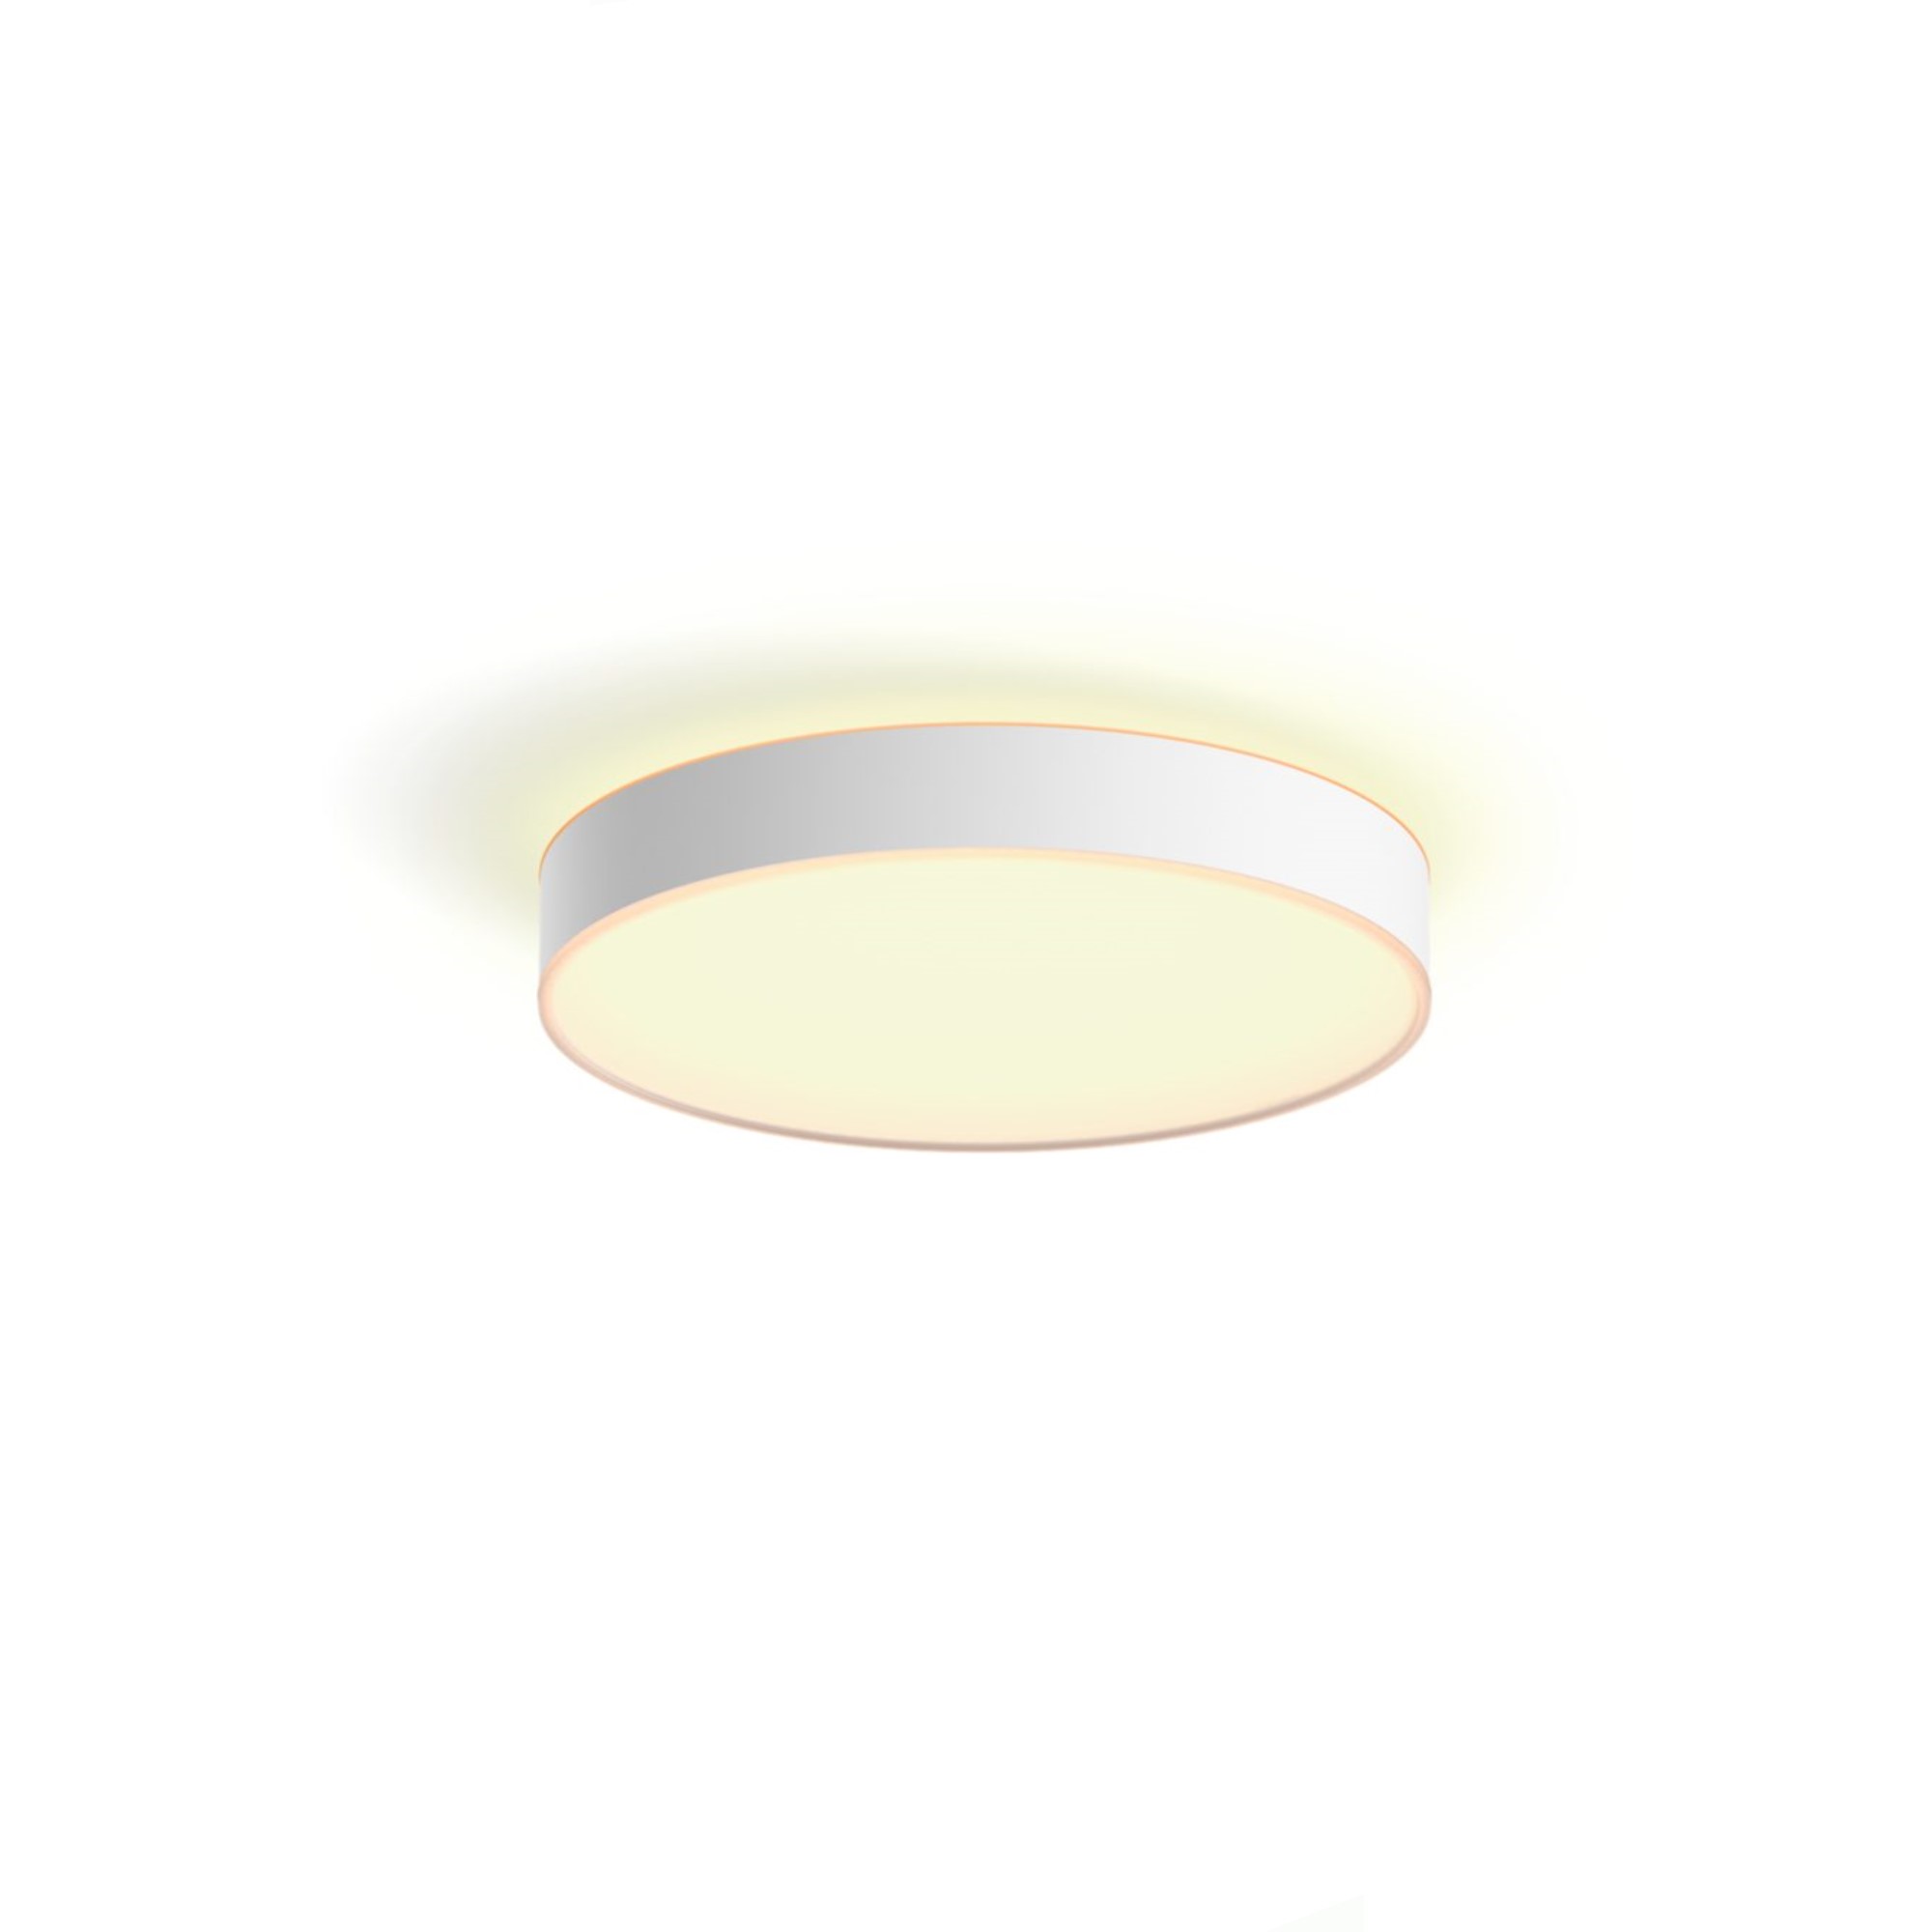 Philips Hue White Ambiance Enrave L LED Ceiling Light white 4300lm incl. Dimmer Switch